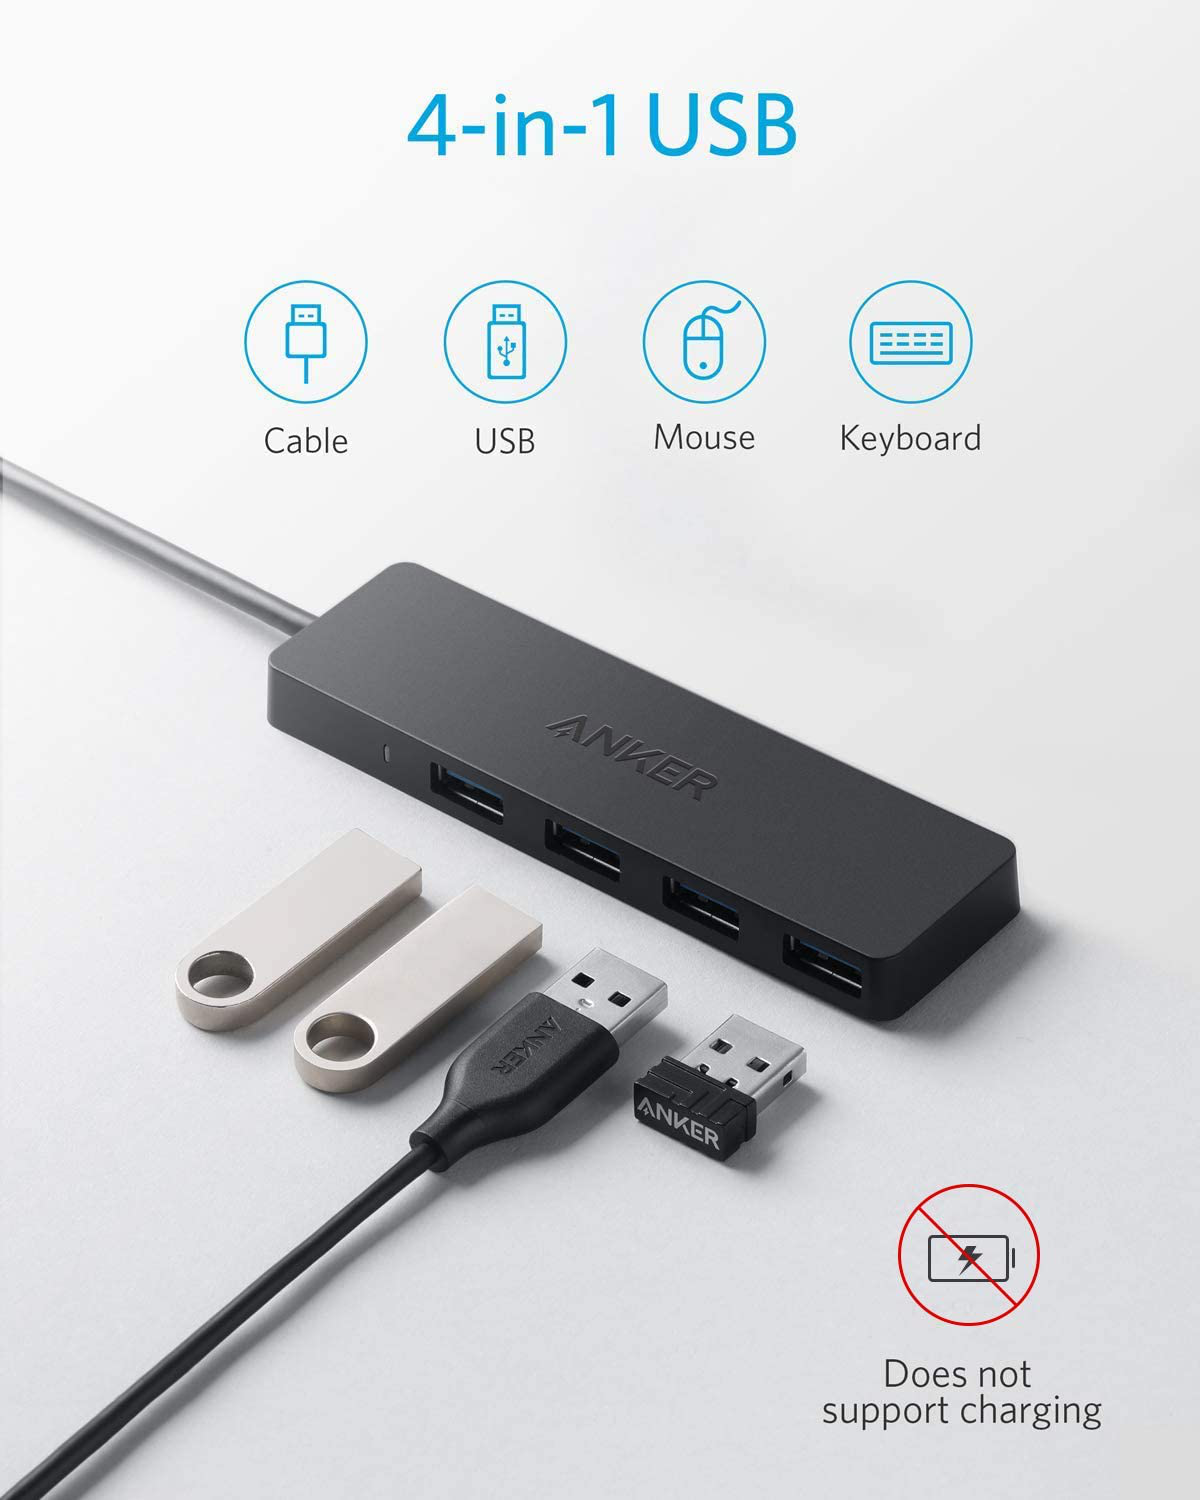 Anker 4-Port USB 3.0 Hub, Ultra-Slim Data USB Hub with 2 Ft Extended Cable [Charging Not Supported], for Macbook, Mac Pro, Mac Mini, Imac, Surface Pro, XPS, PC, Flash Drive, Mobile HDD Animals & Pet Supplies > Pet Supplies > Dog Supplies > Dog Diaper Pads & Liners Anker   